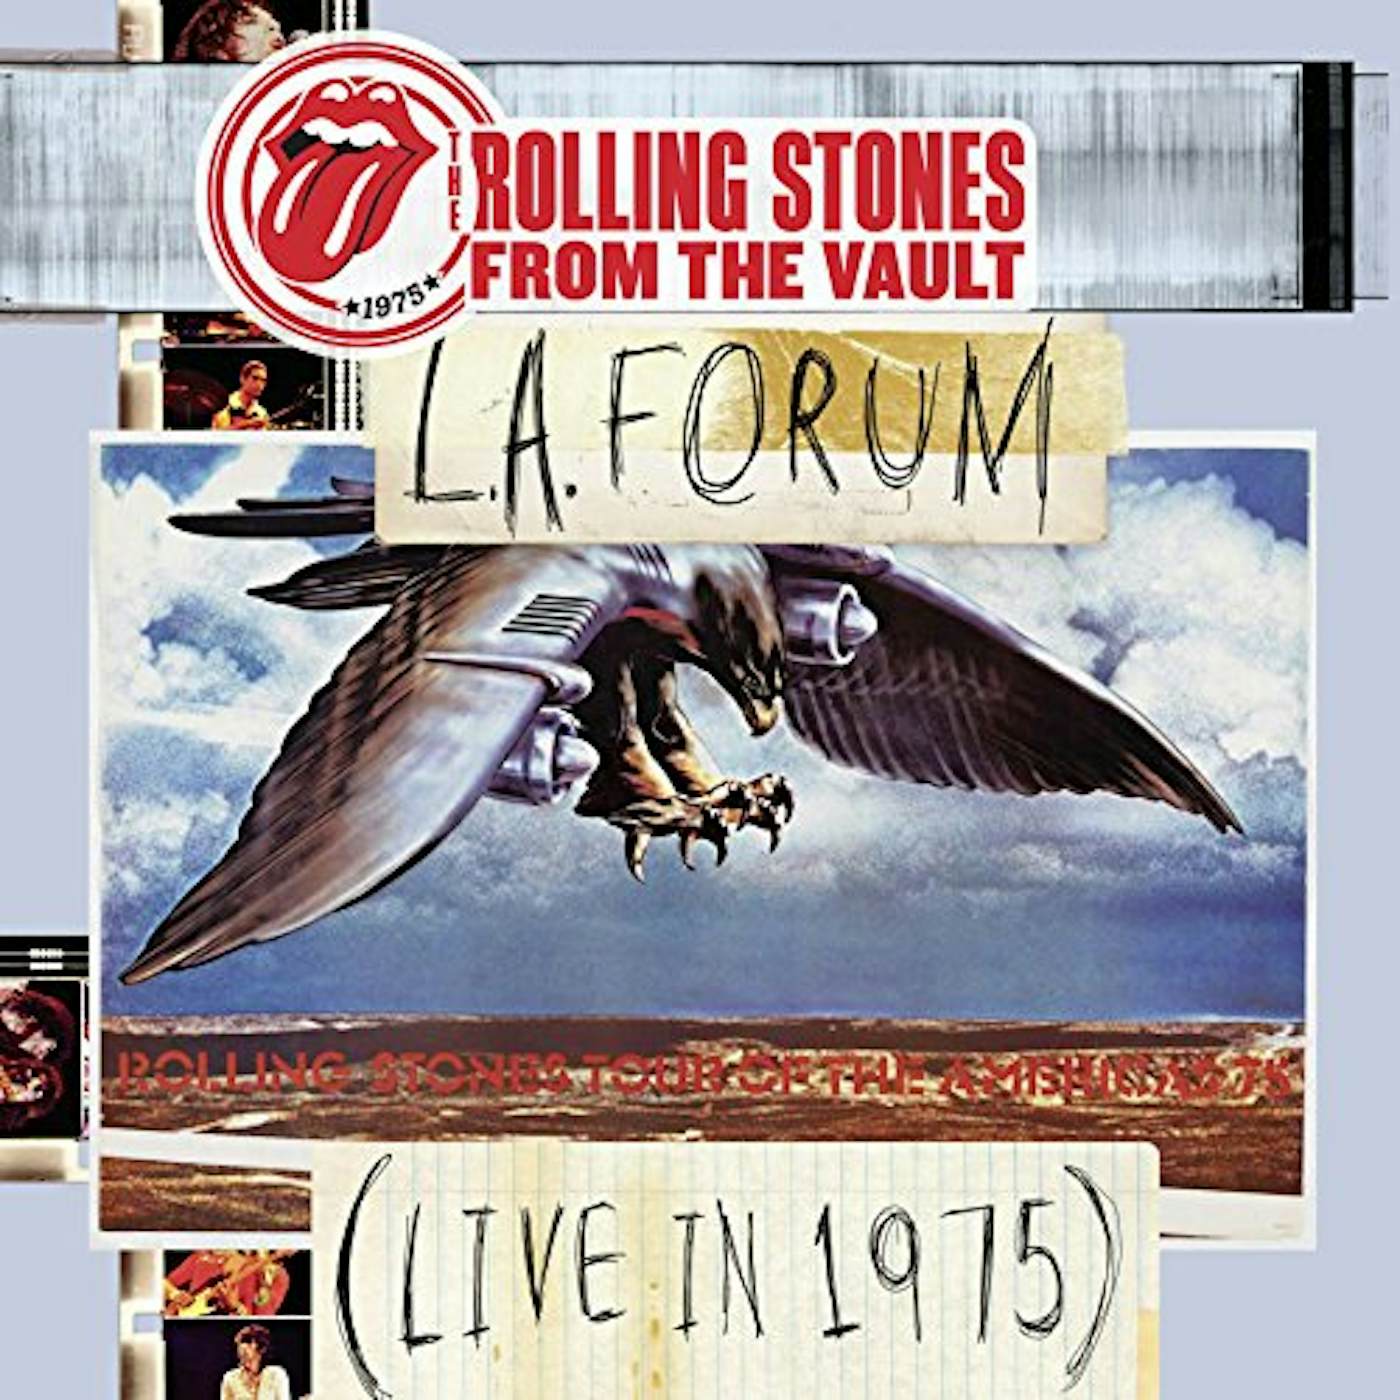 The Rolling Stones FROM THE VAULT: L.A. FORUM (LIVE IN 1975) Vinyl Record